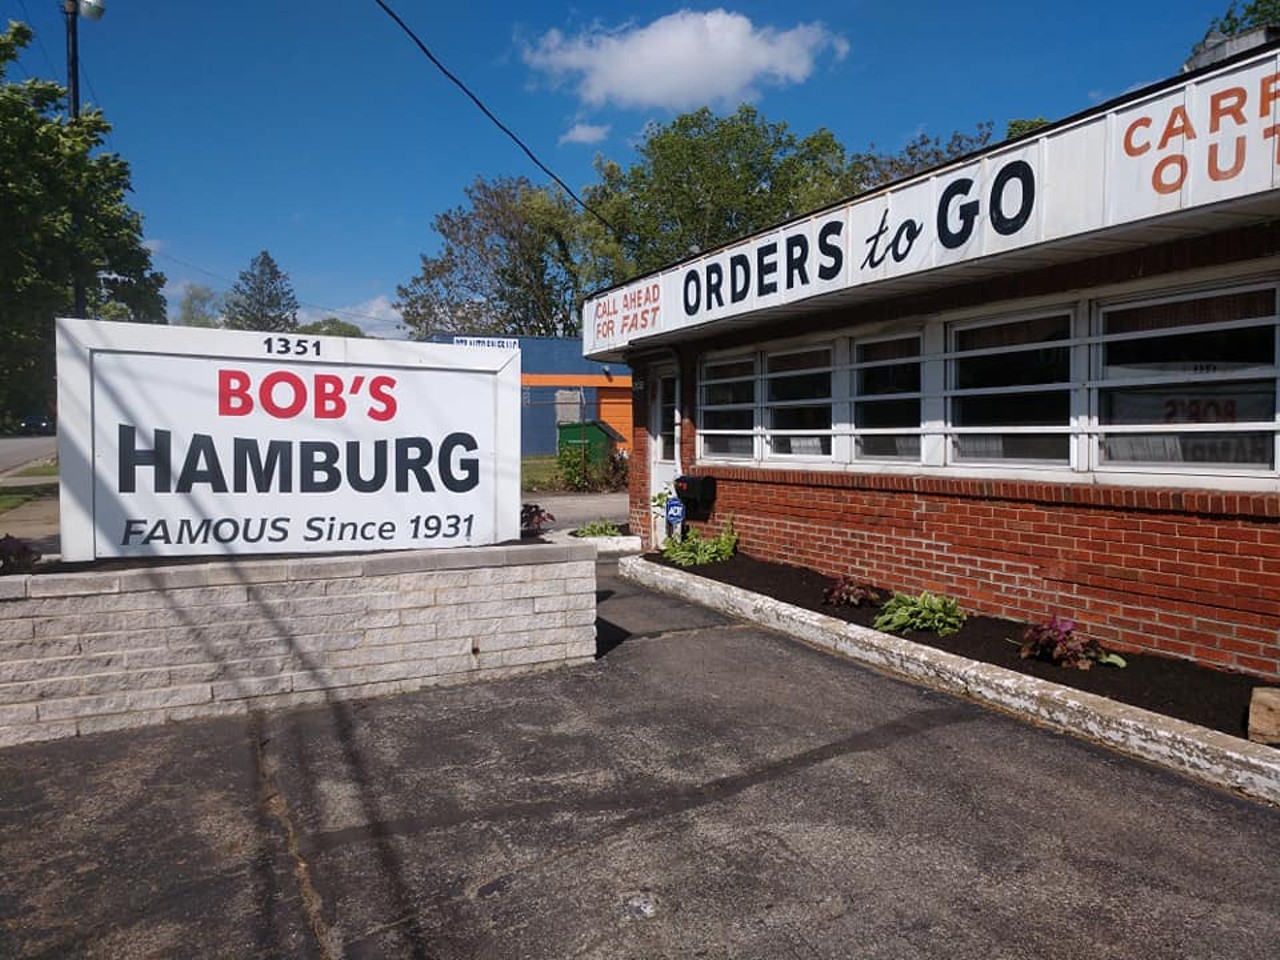  Bob's Hamburg
1351 East Ave., Akron
An Akron staple and one of the older burger places on this list, Bob's opened in 1931 and has outlasted the McDonald's that opened up across the street in 1960 and then closed in 1997. That should tell you how seriously good these burgers are. 
Photo via Bob&#146;s Hamburg/Facebook